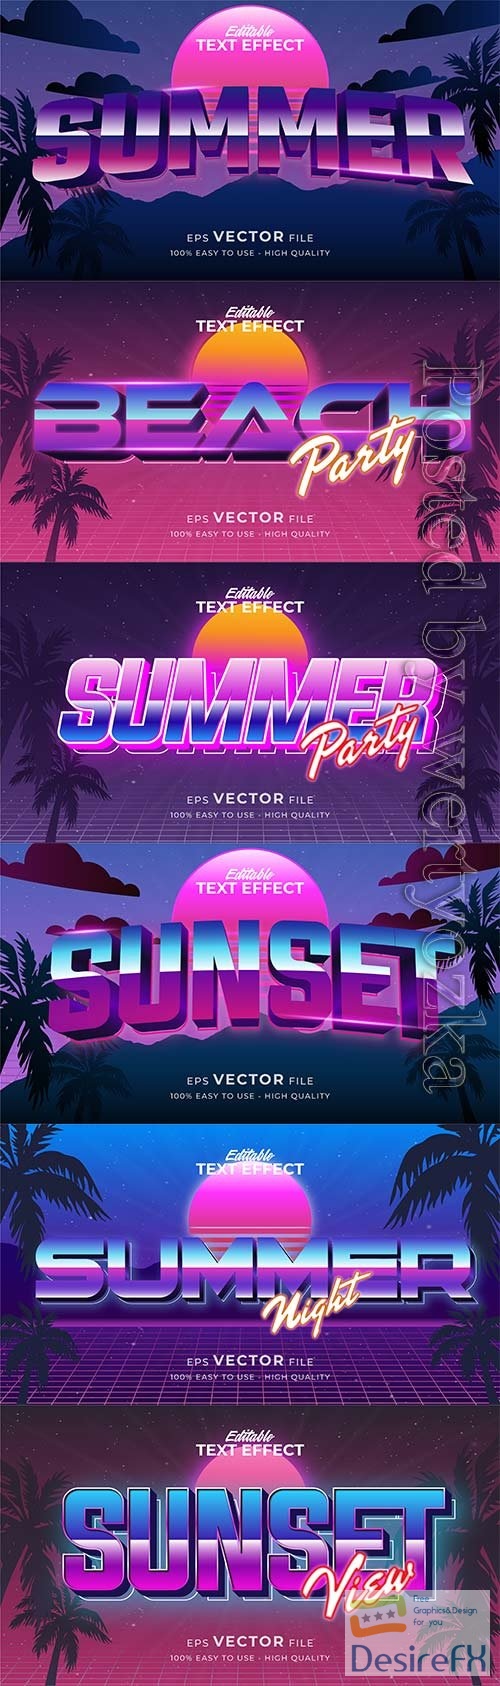 Text style effect, retro summer text in grunge style vol 5